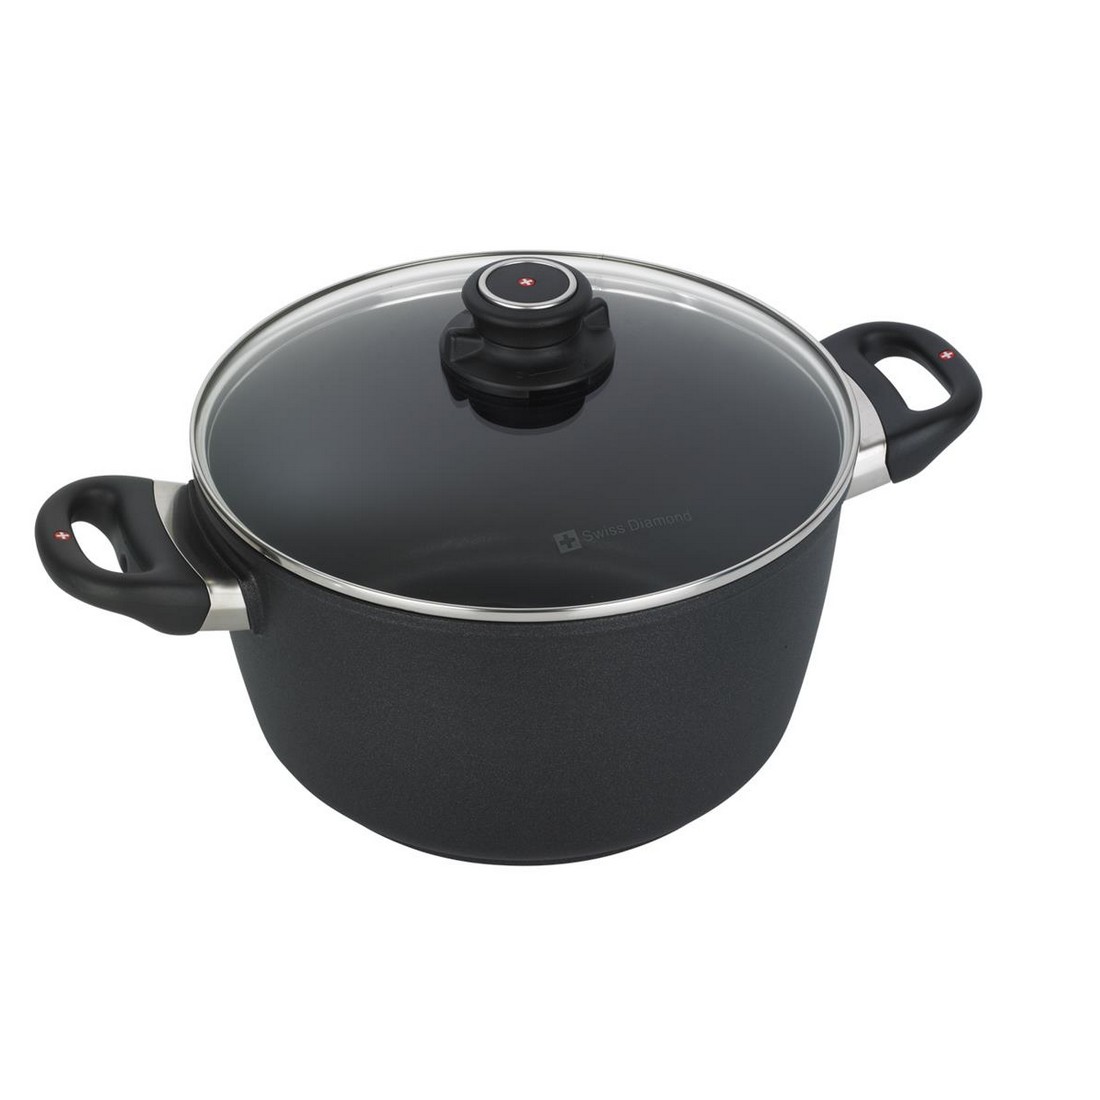 xd 5.2 l non-stick saucepan with glass lid - induction